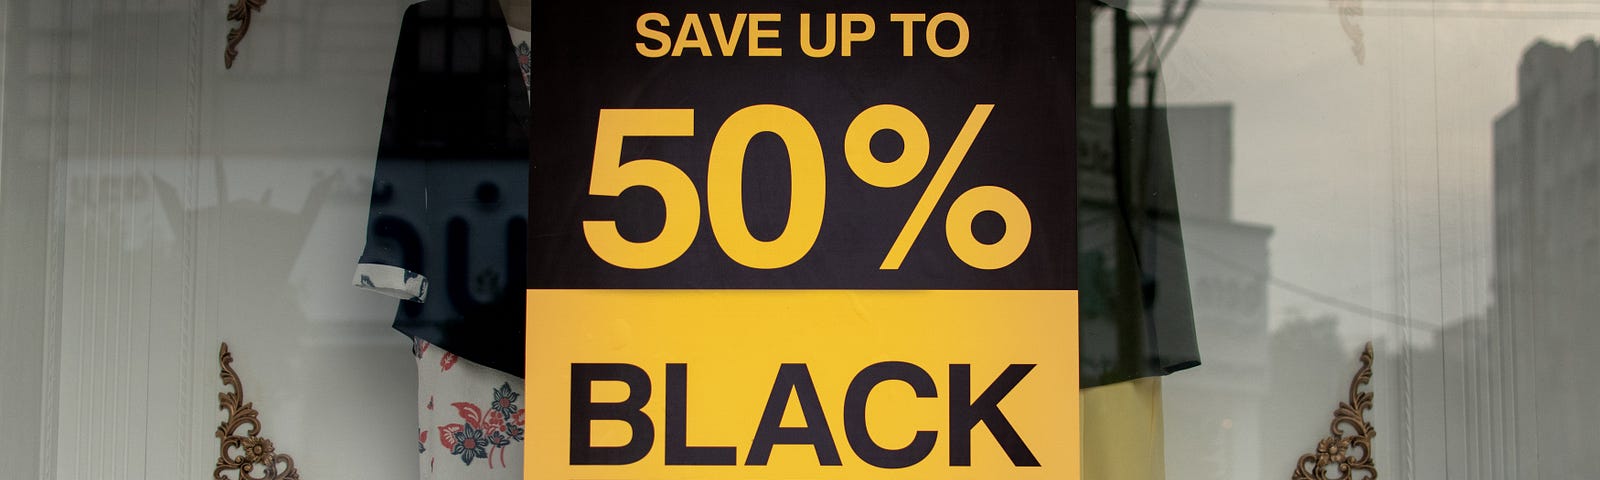 A black and yellow sign posted in the window of a store that says “Save up to 50% Black Friday Now it’s time to save big”